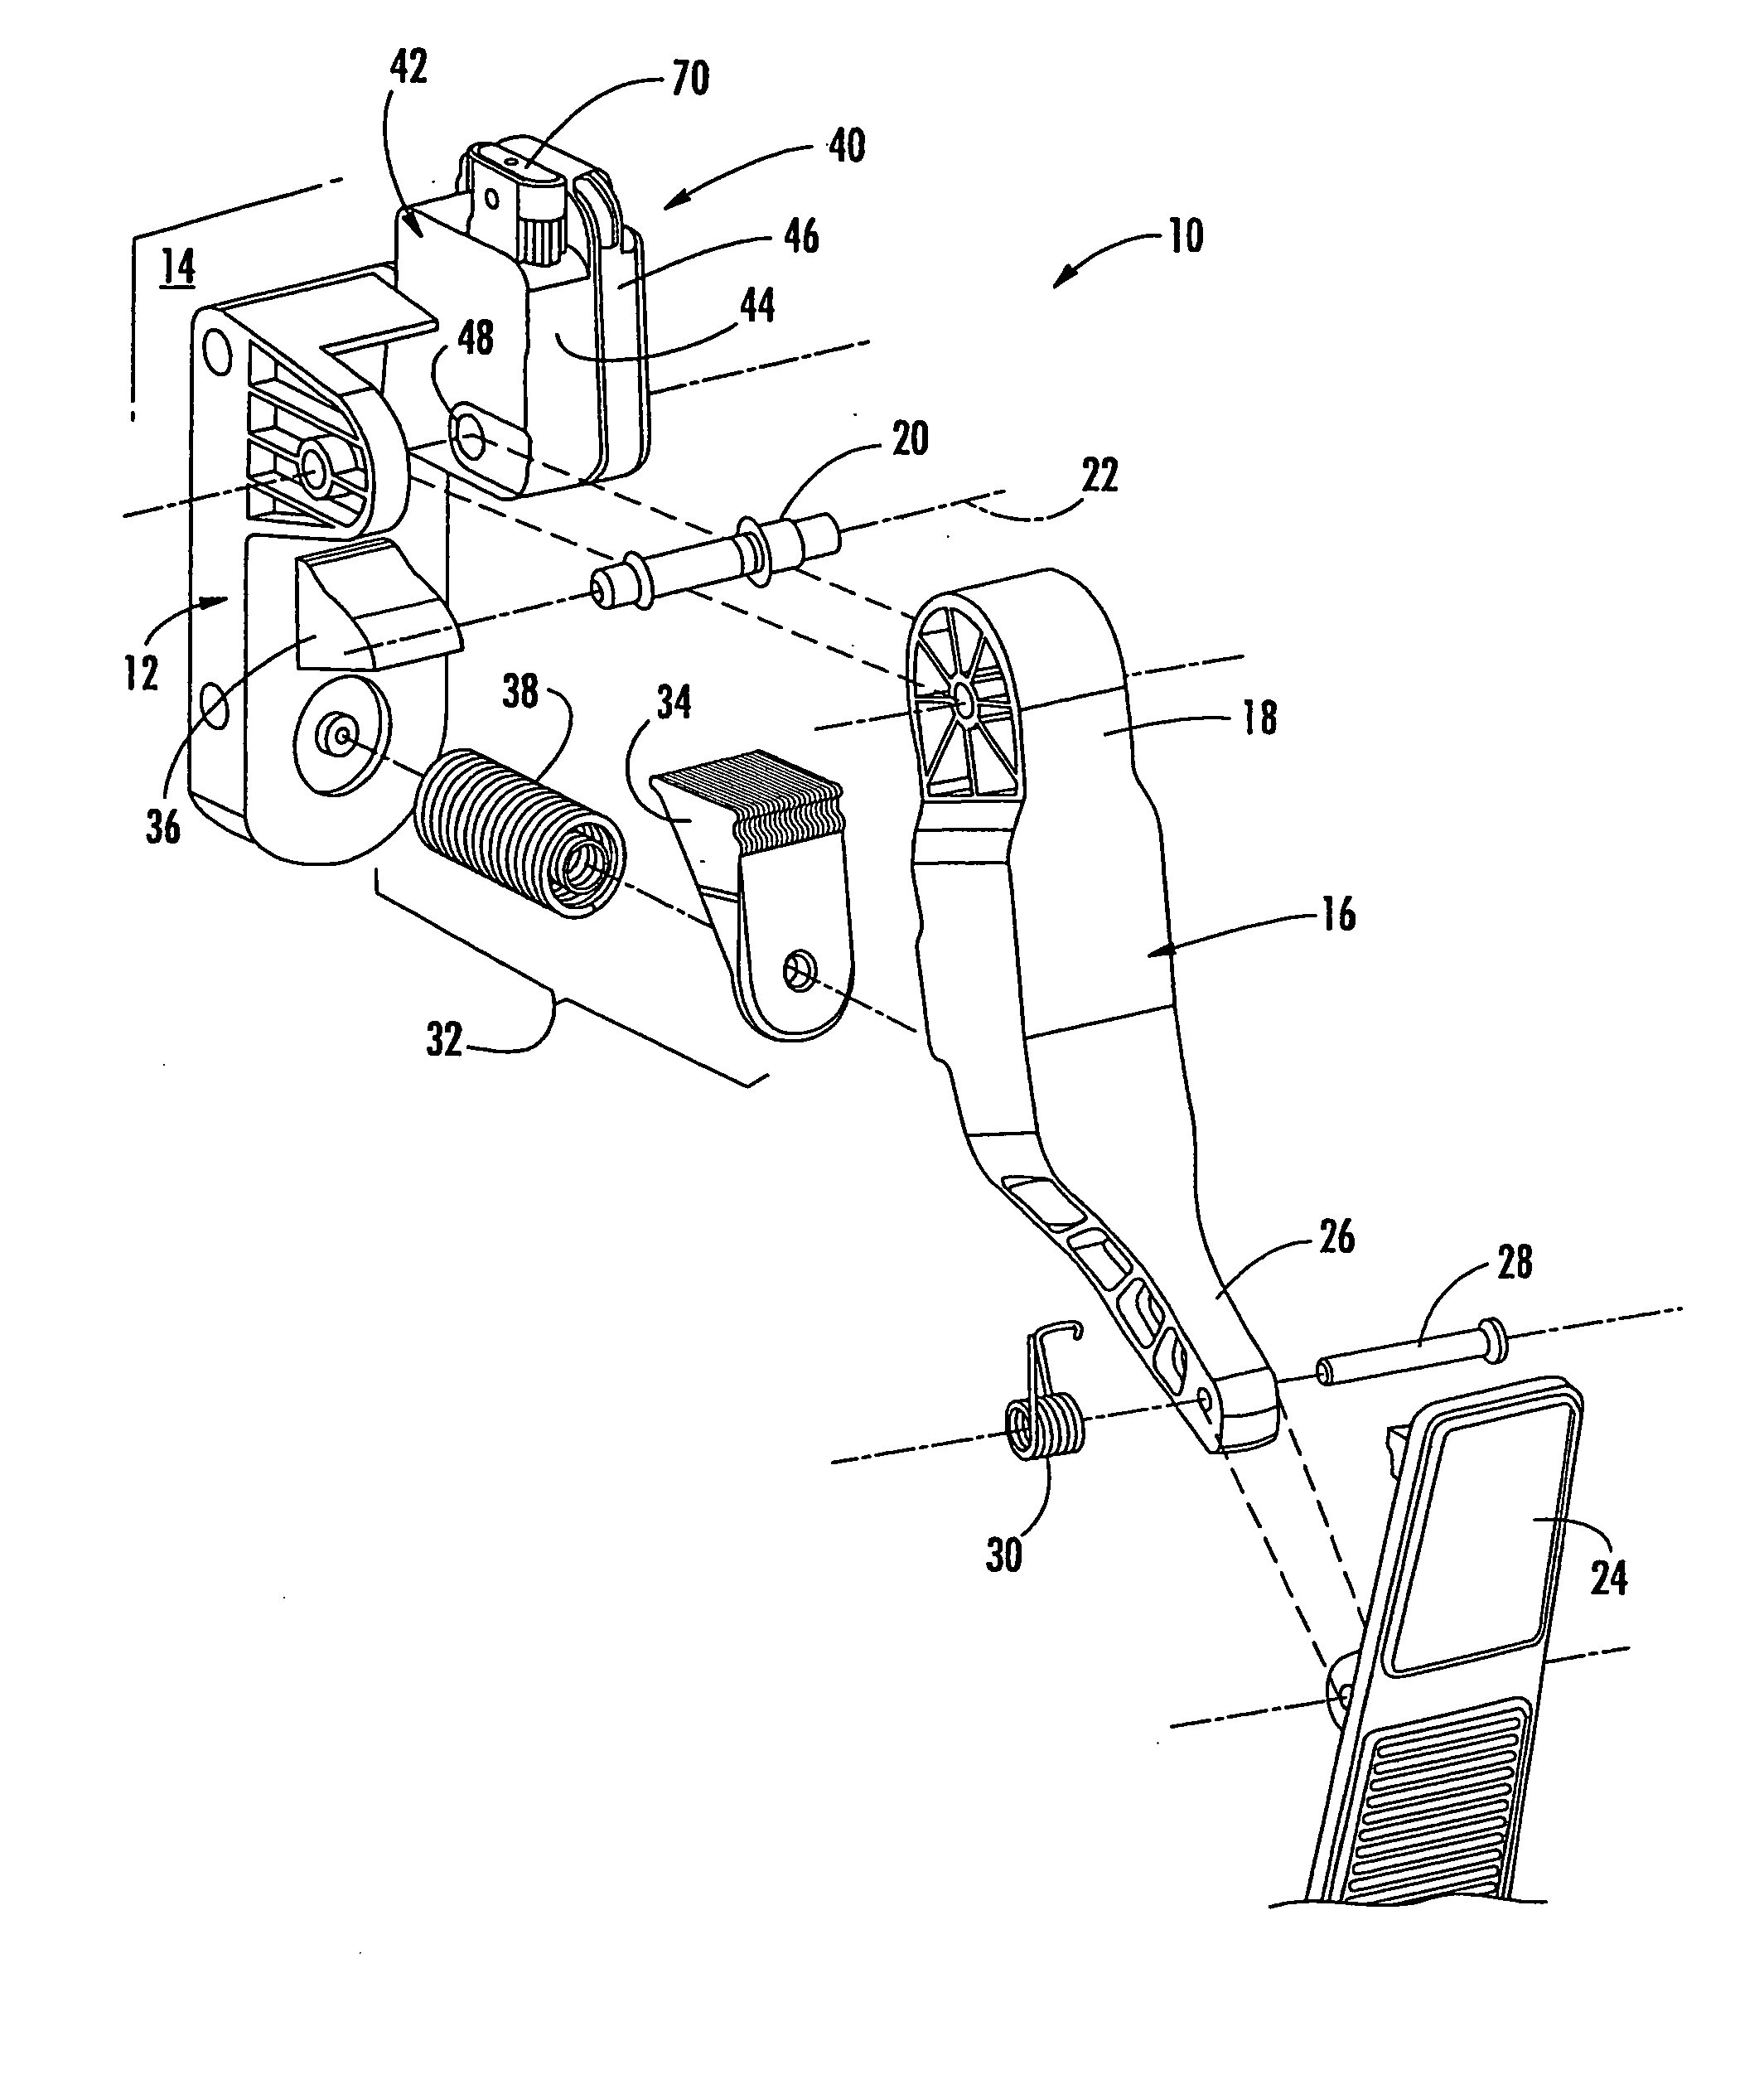 Electronic control pedal position sensing device assembly method